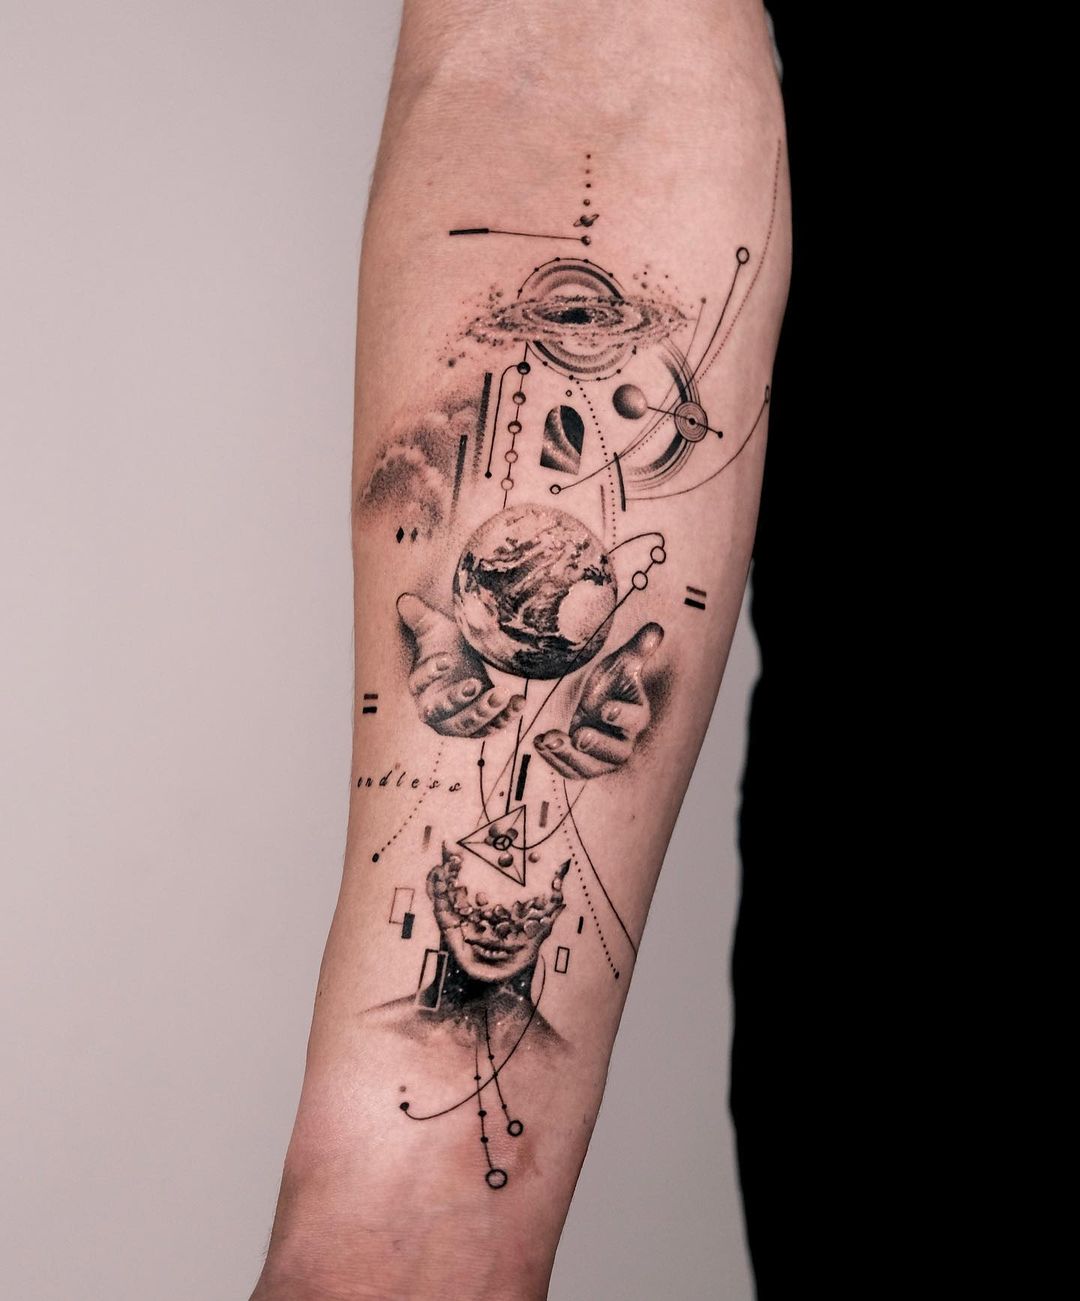 Realistic space tattoo by even gmt.ink